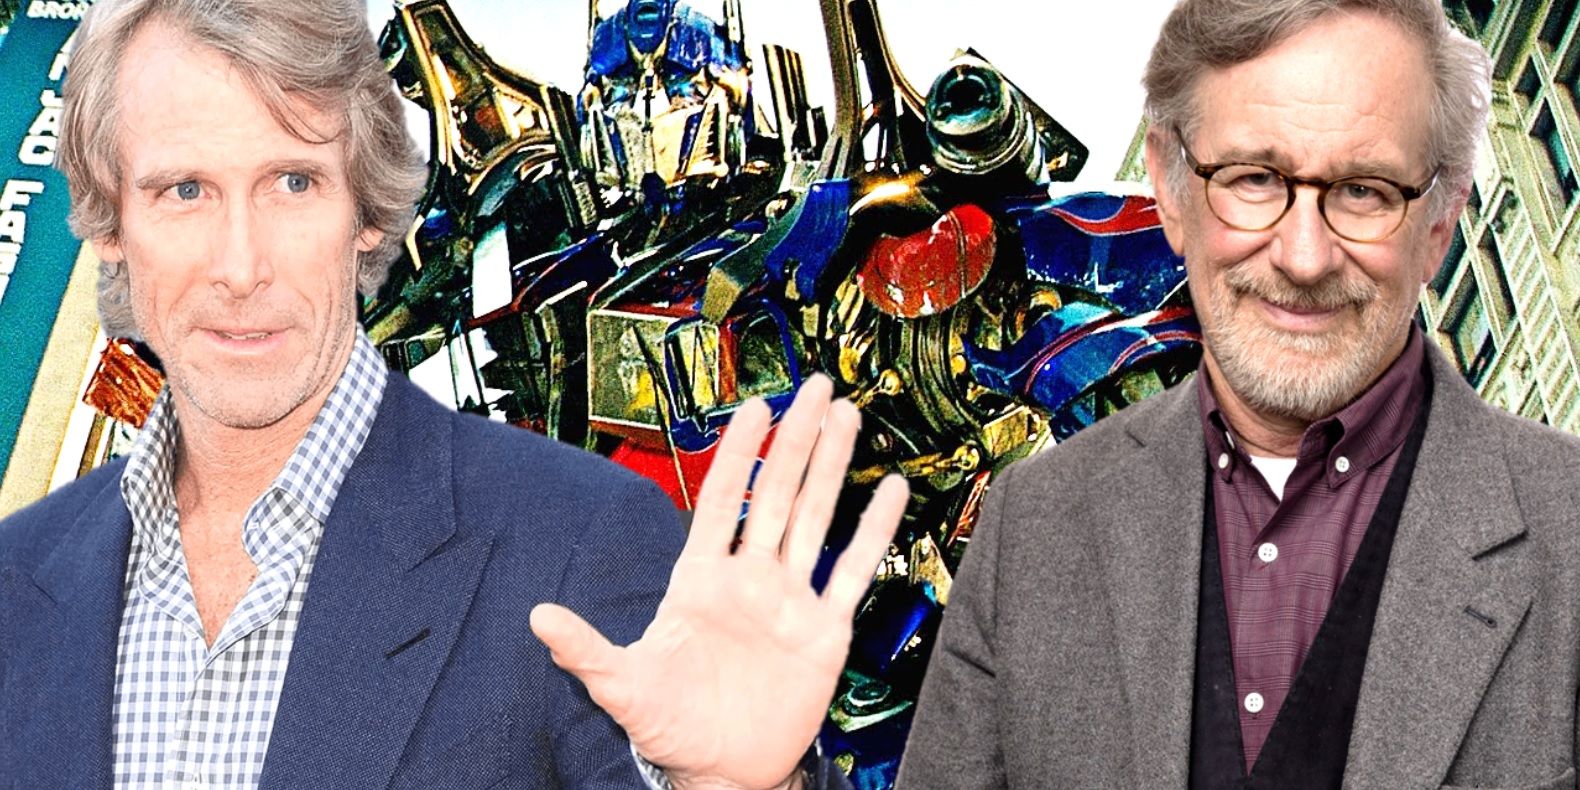 Collage of Michael Bay, Optimus Prime, and Steven Spielberg